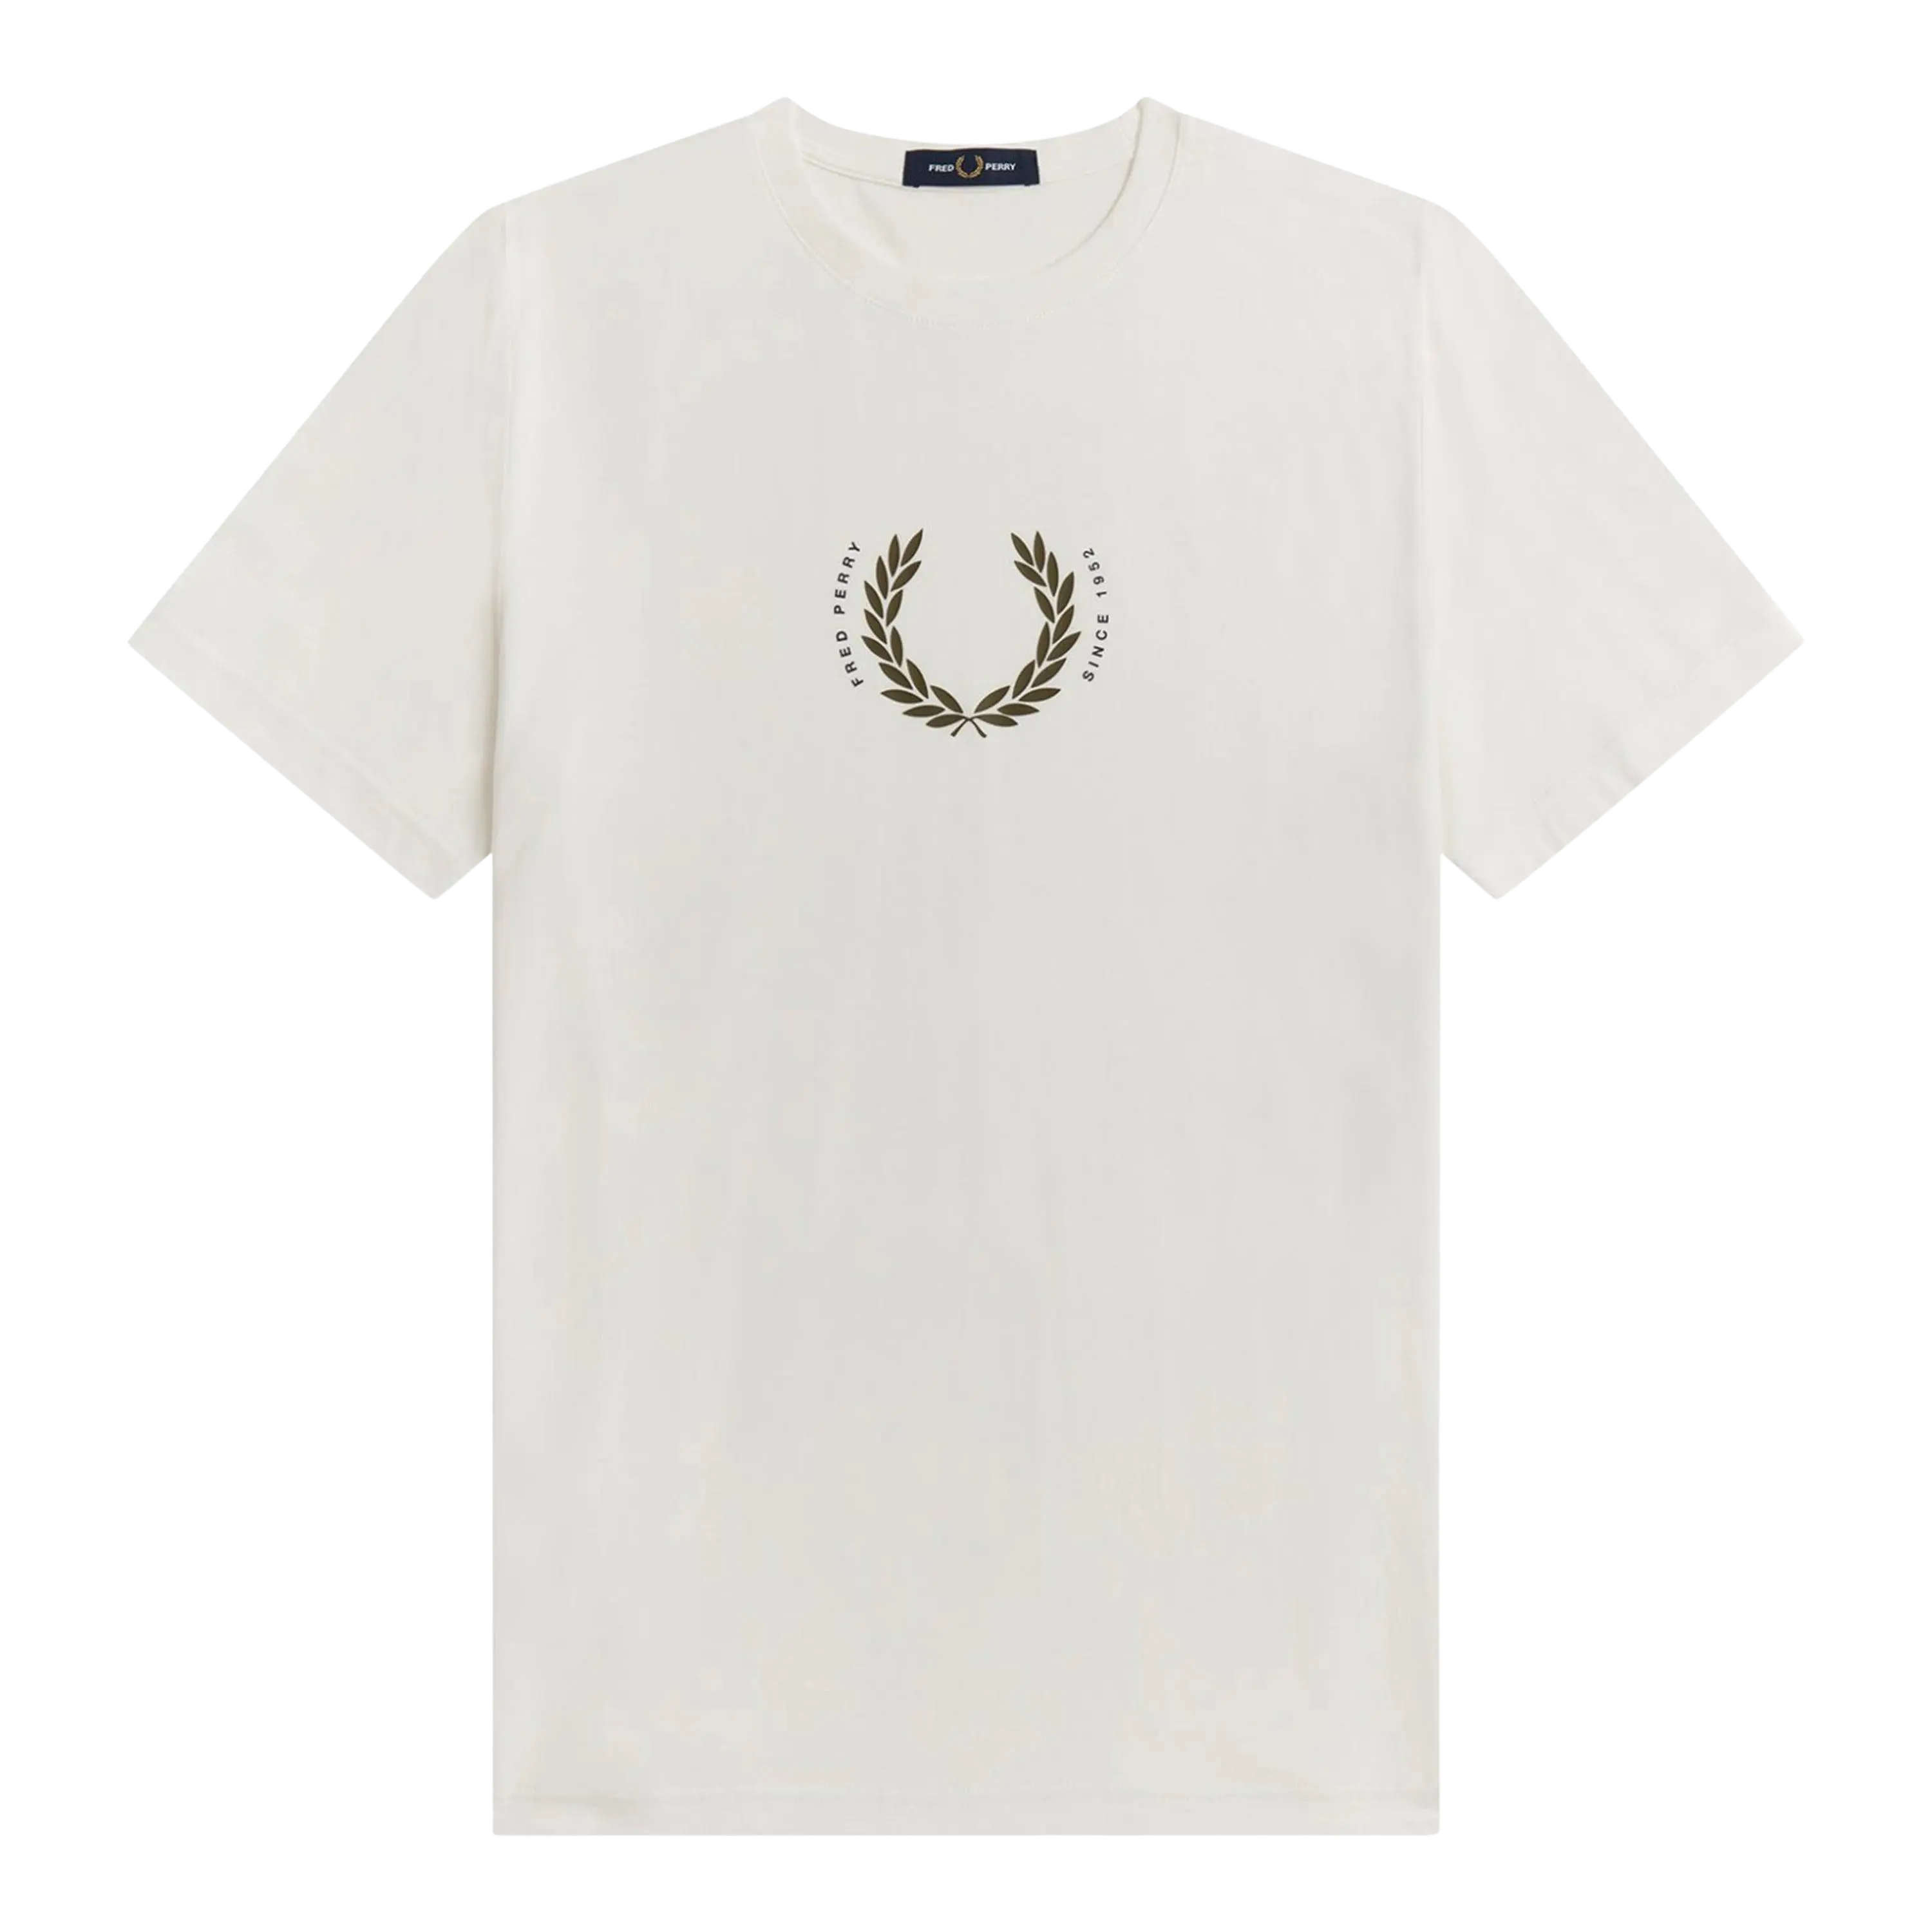 Fred Perry Laurel Wreath Tee for Men